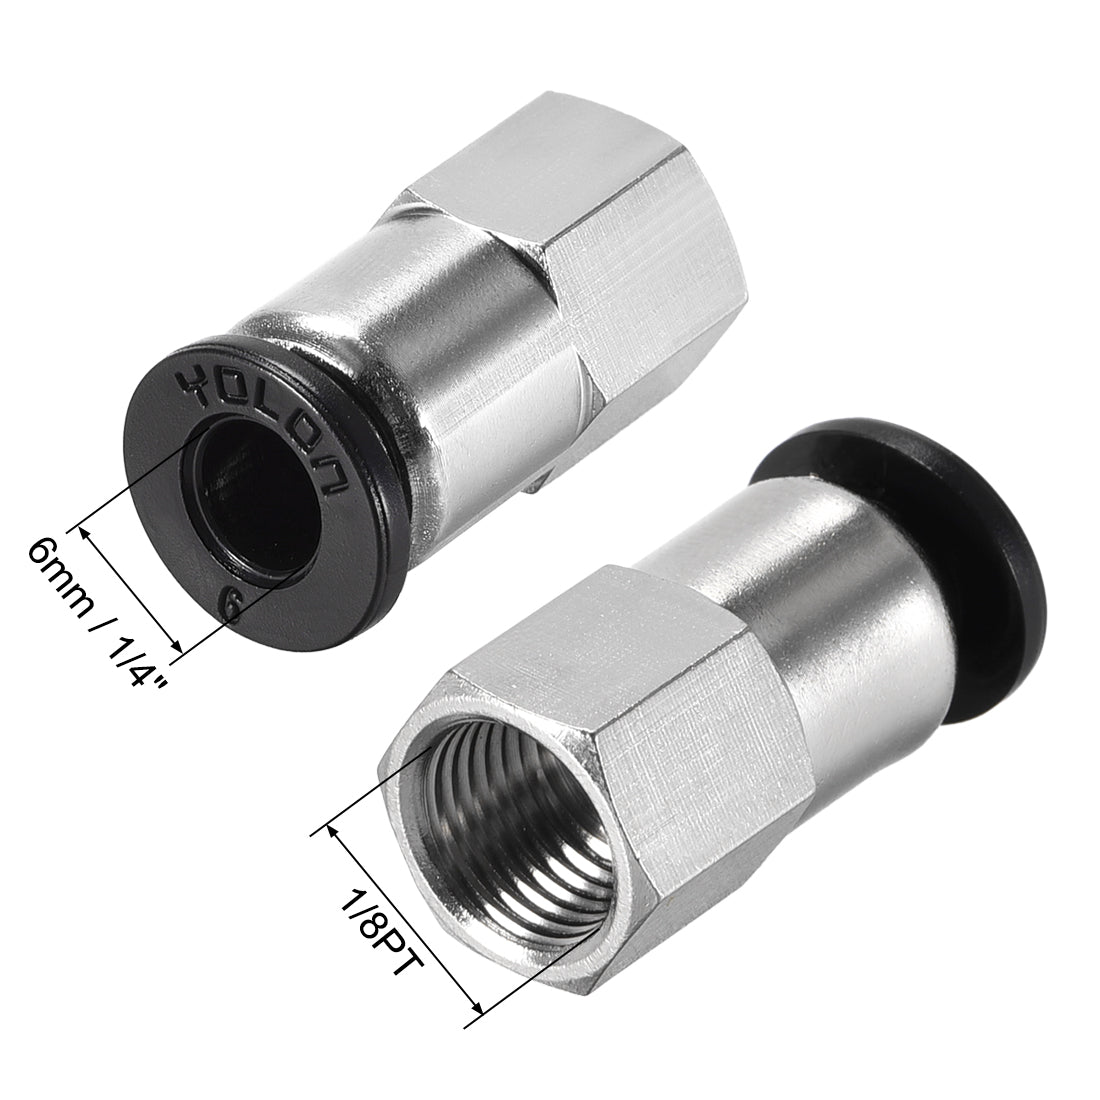 uxcell Uxcell Push to Connect Tube Fitting Adapter 6mm Tube OD x 1/8 PT Female Straight Pneumatic Connecter Pipe Fitting 2pcs